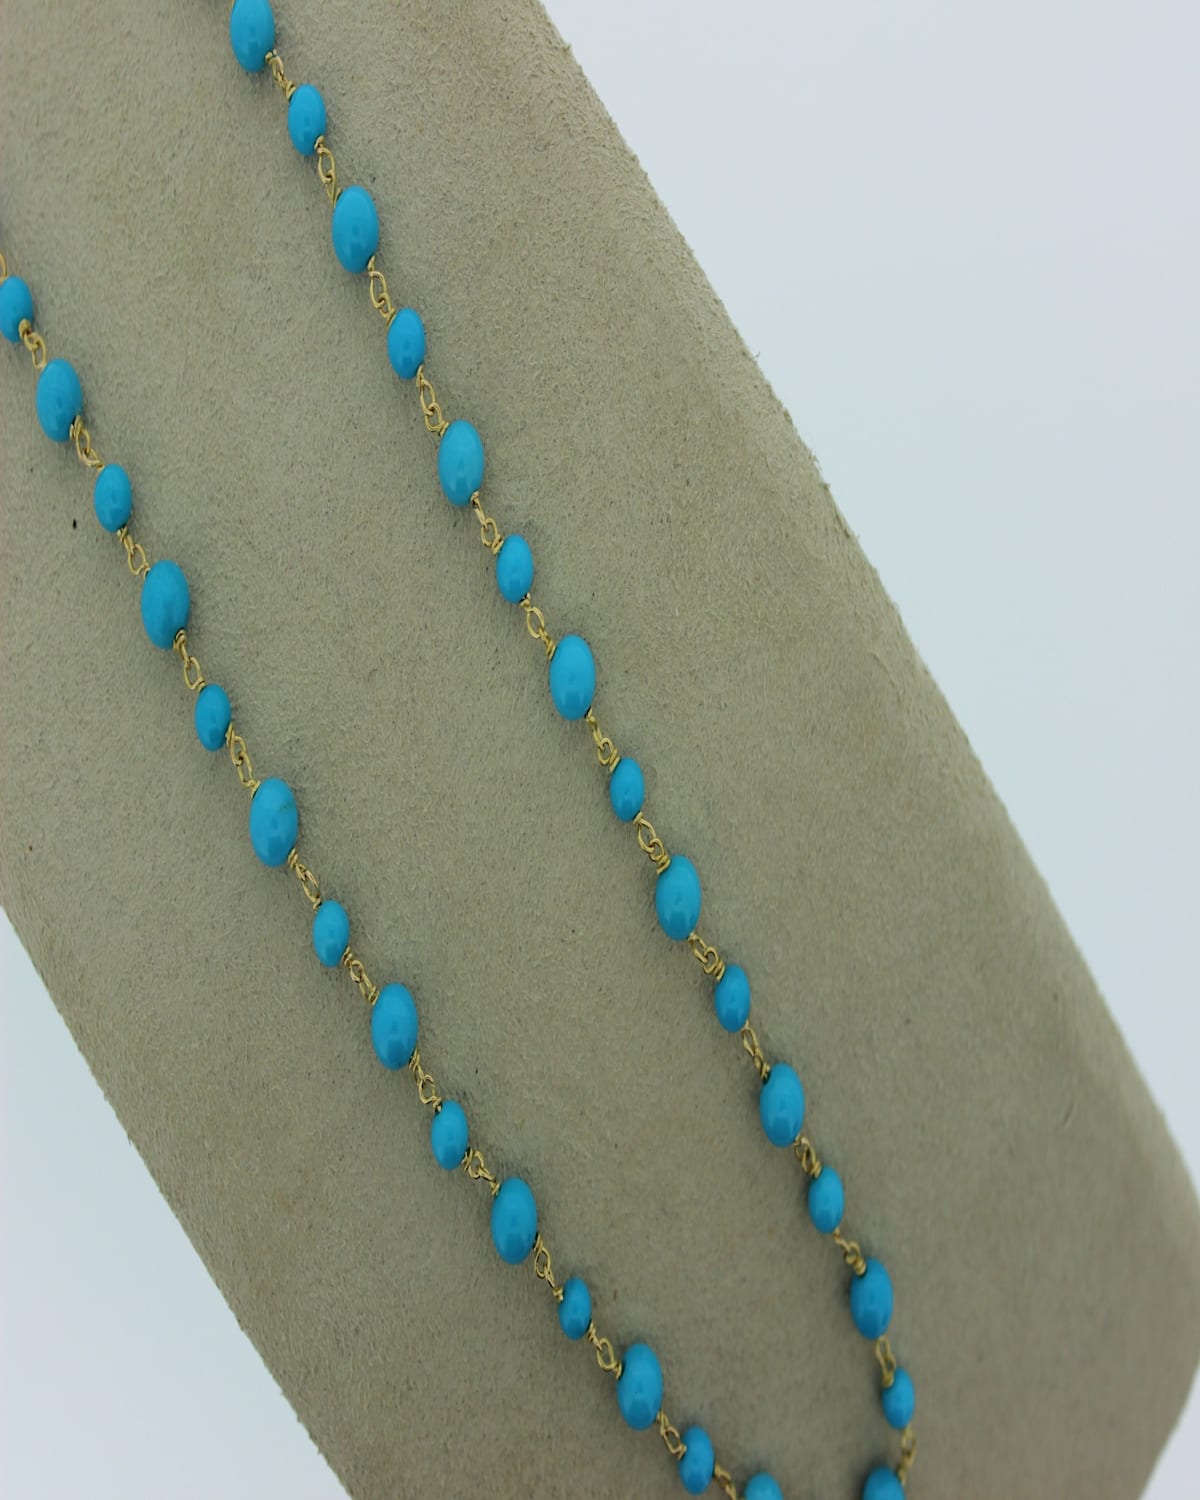 Limited Edition 18k Turquoise Bead Necklace, 36"L